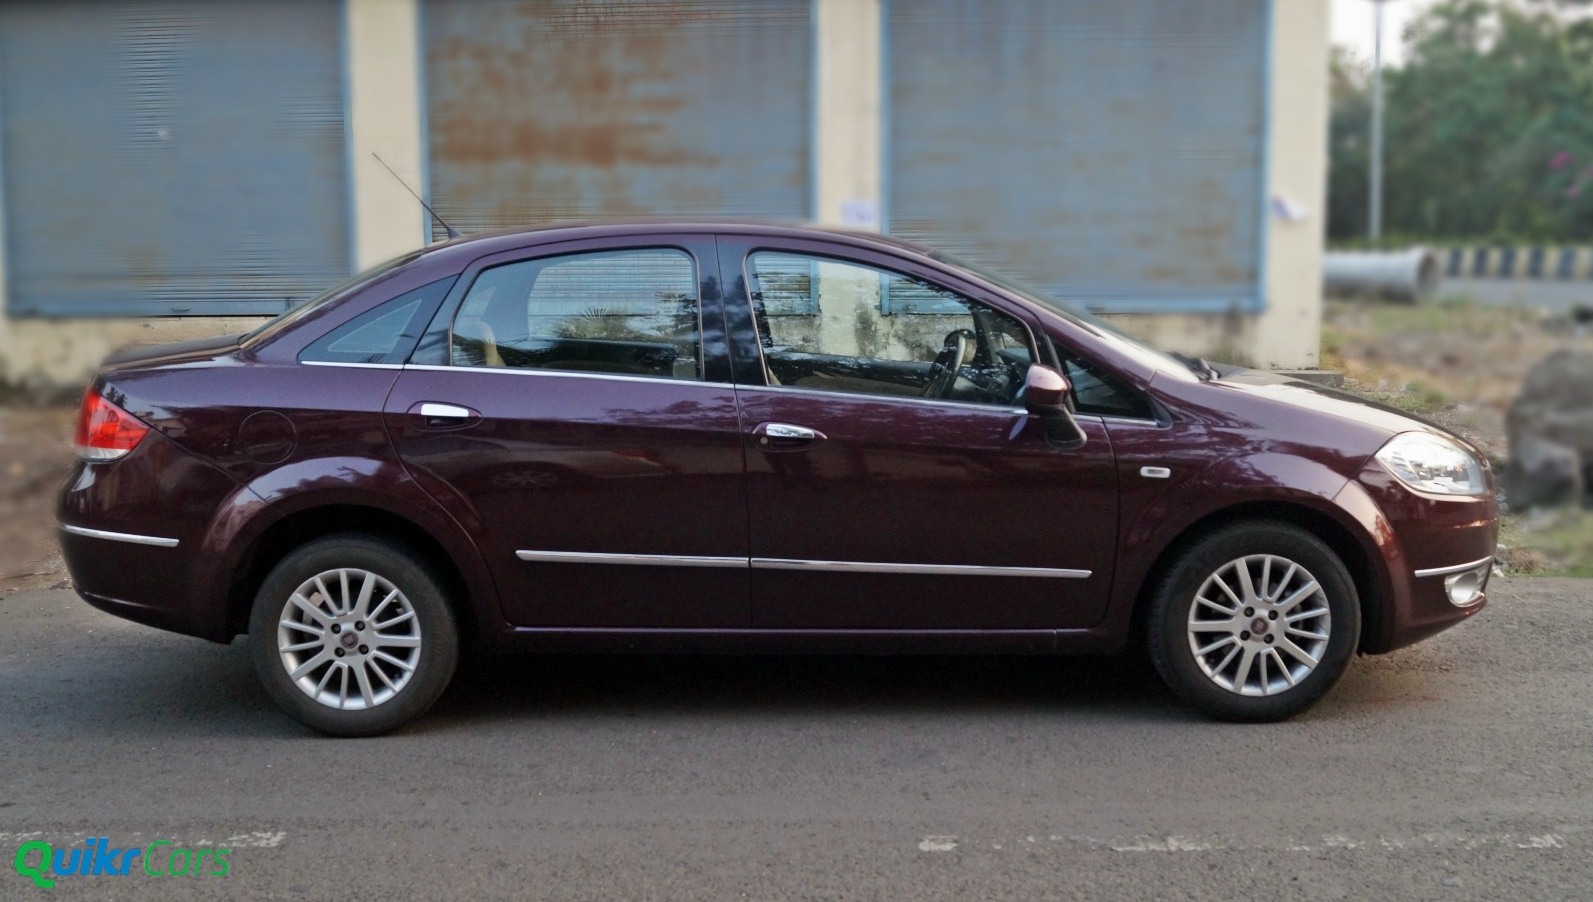 Fiat Linea used Side View